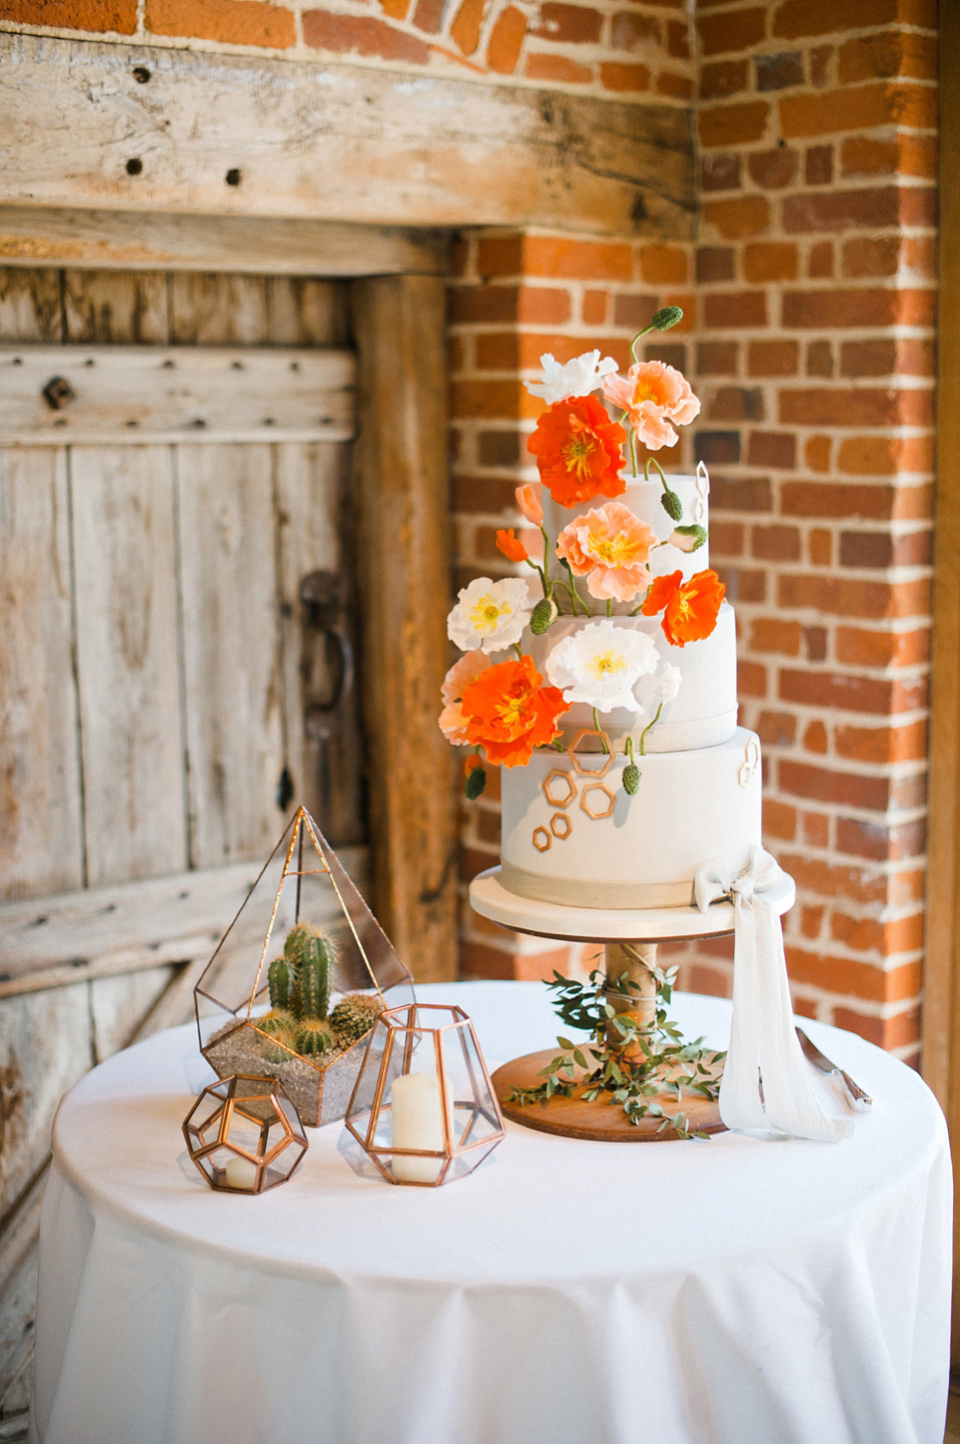 A Bright and Colourful, Geometric Inspired and Homespun Barn Wedding. Photography by Anushe Low. Cake by Clare of Little Bear Cakery.